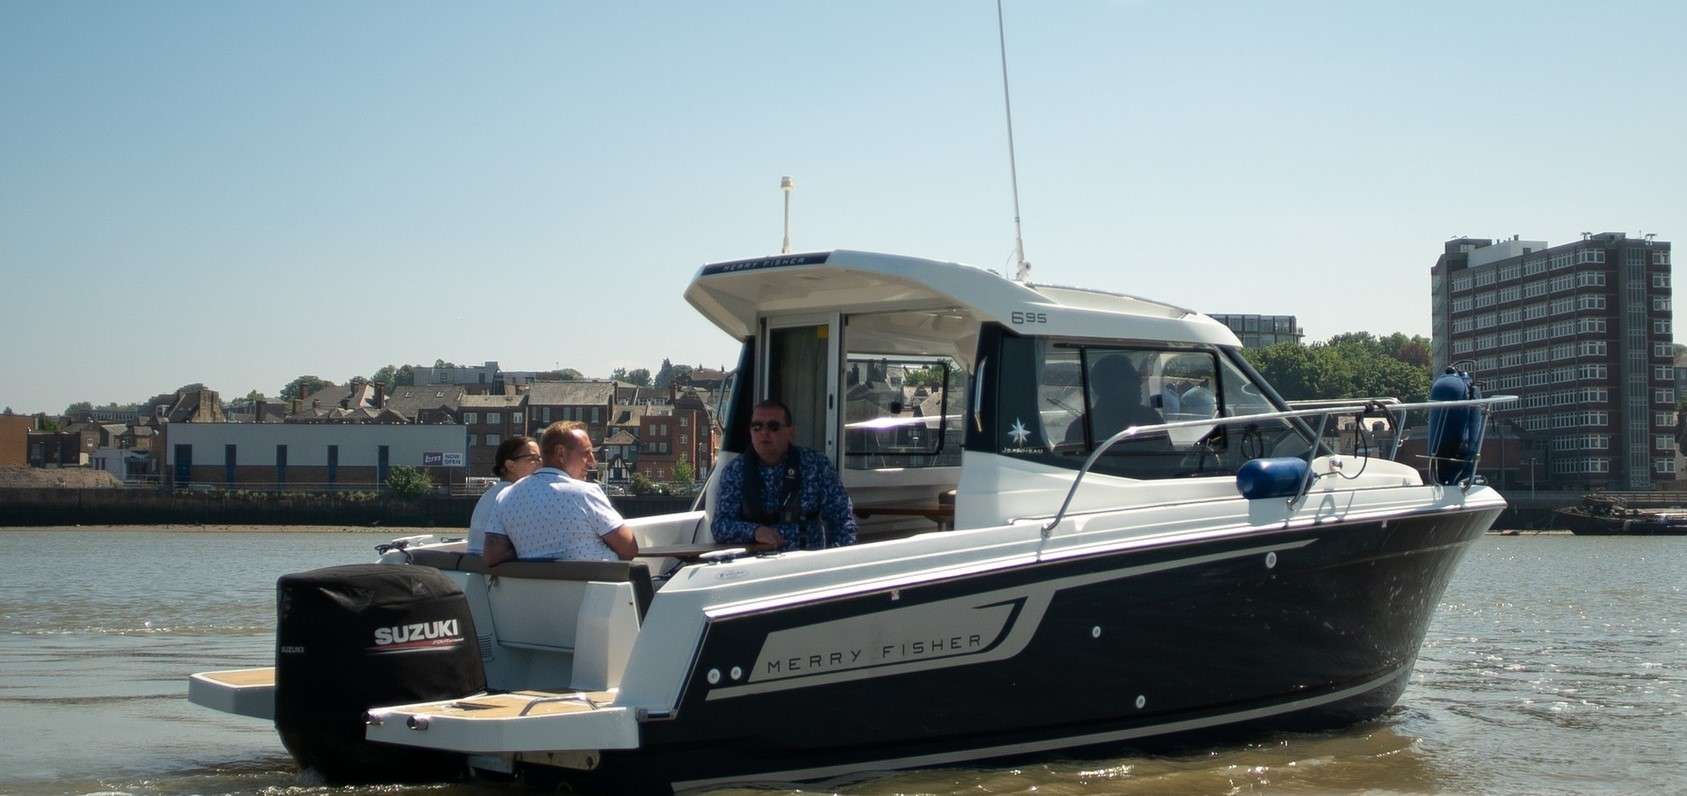 Merry Fisher 695 - Motor Boat Charter United Kingdom & Boat hire in United Kingdom England Greater London Saint Mary's Island 1